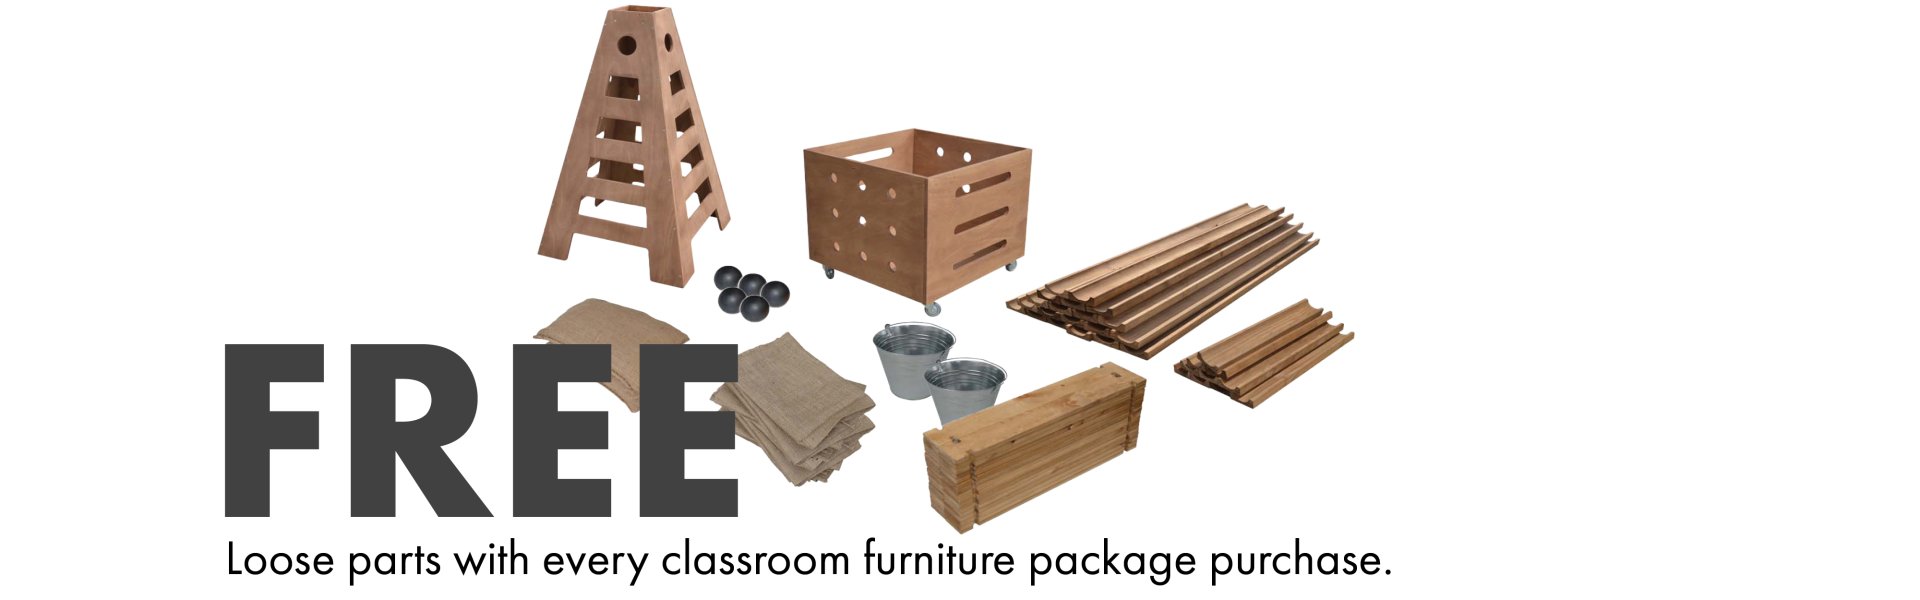 Free loose parts package